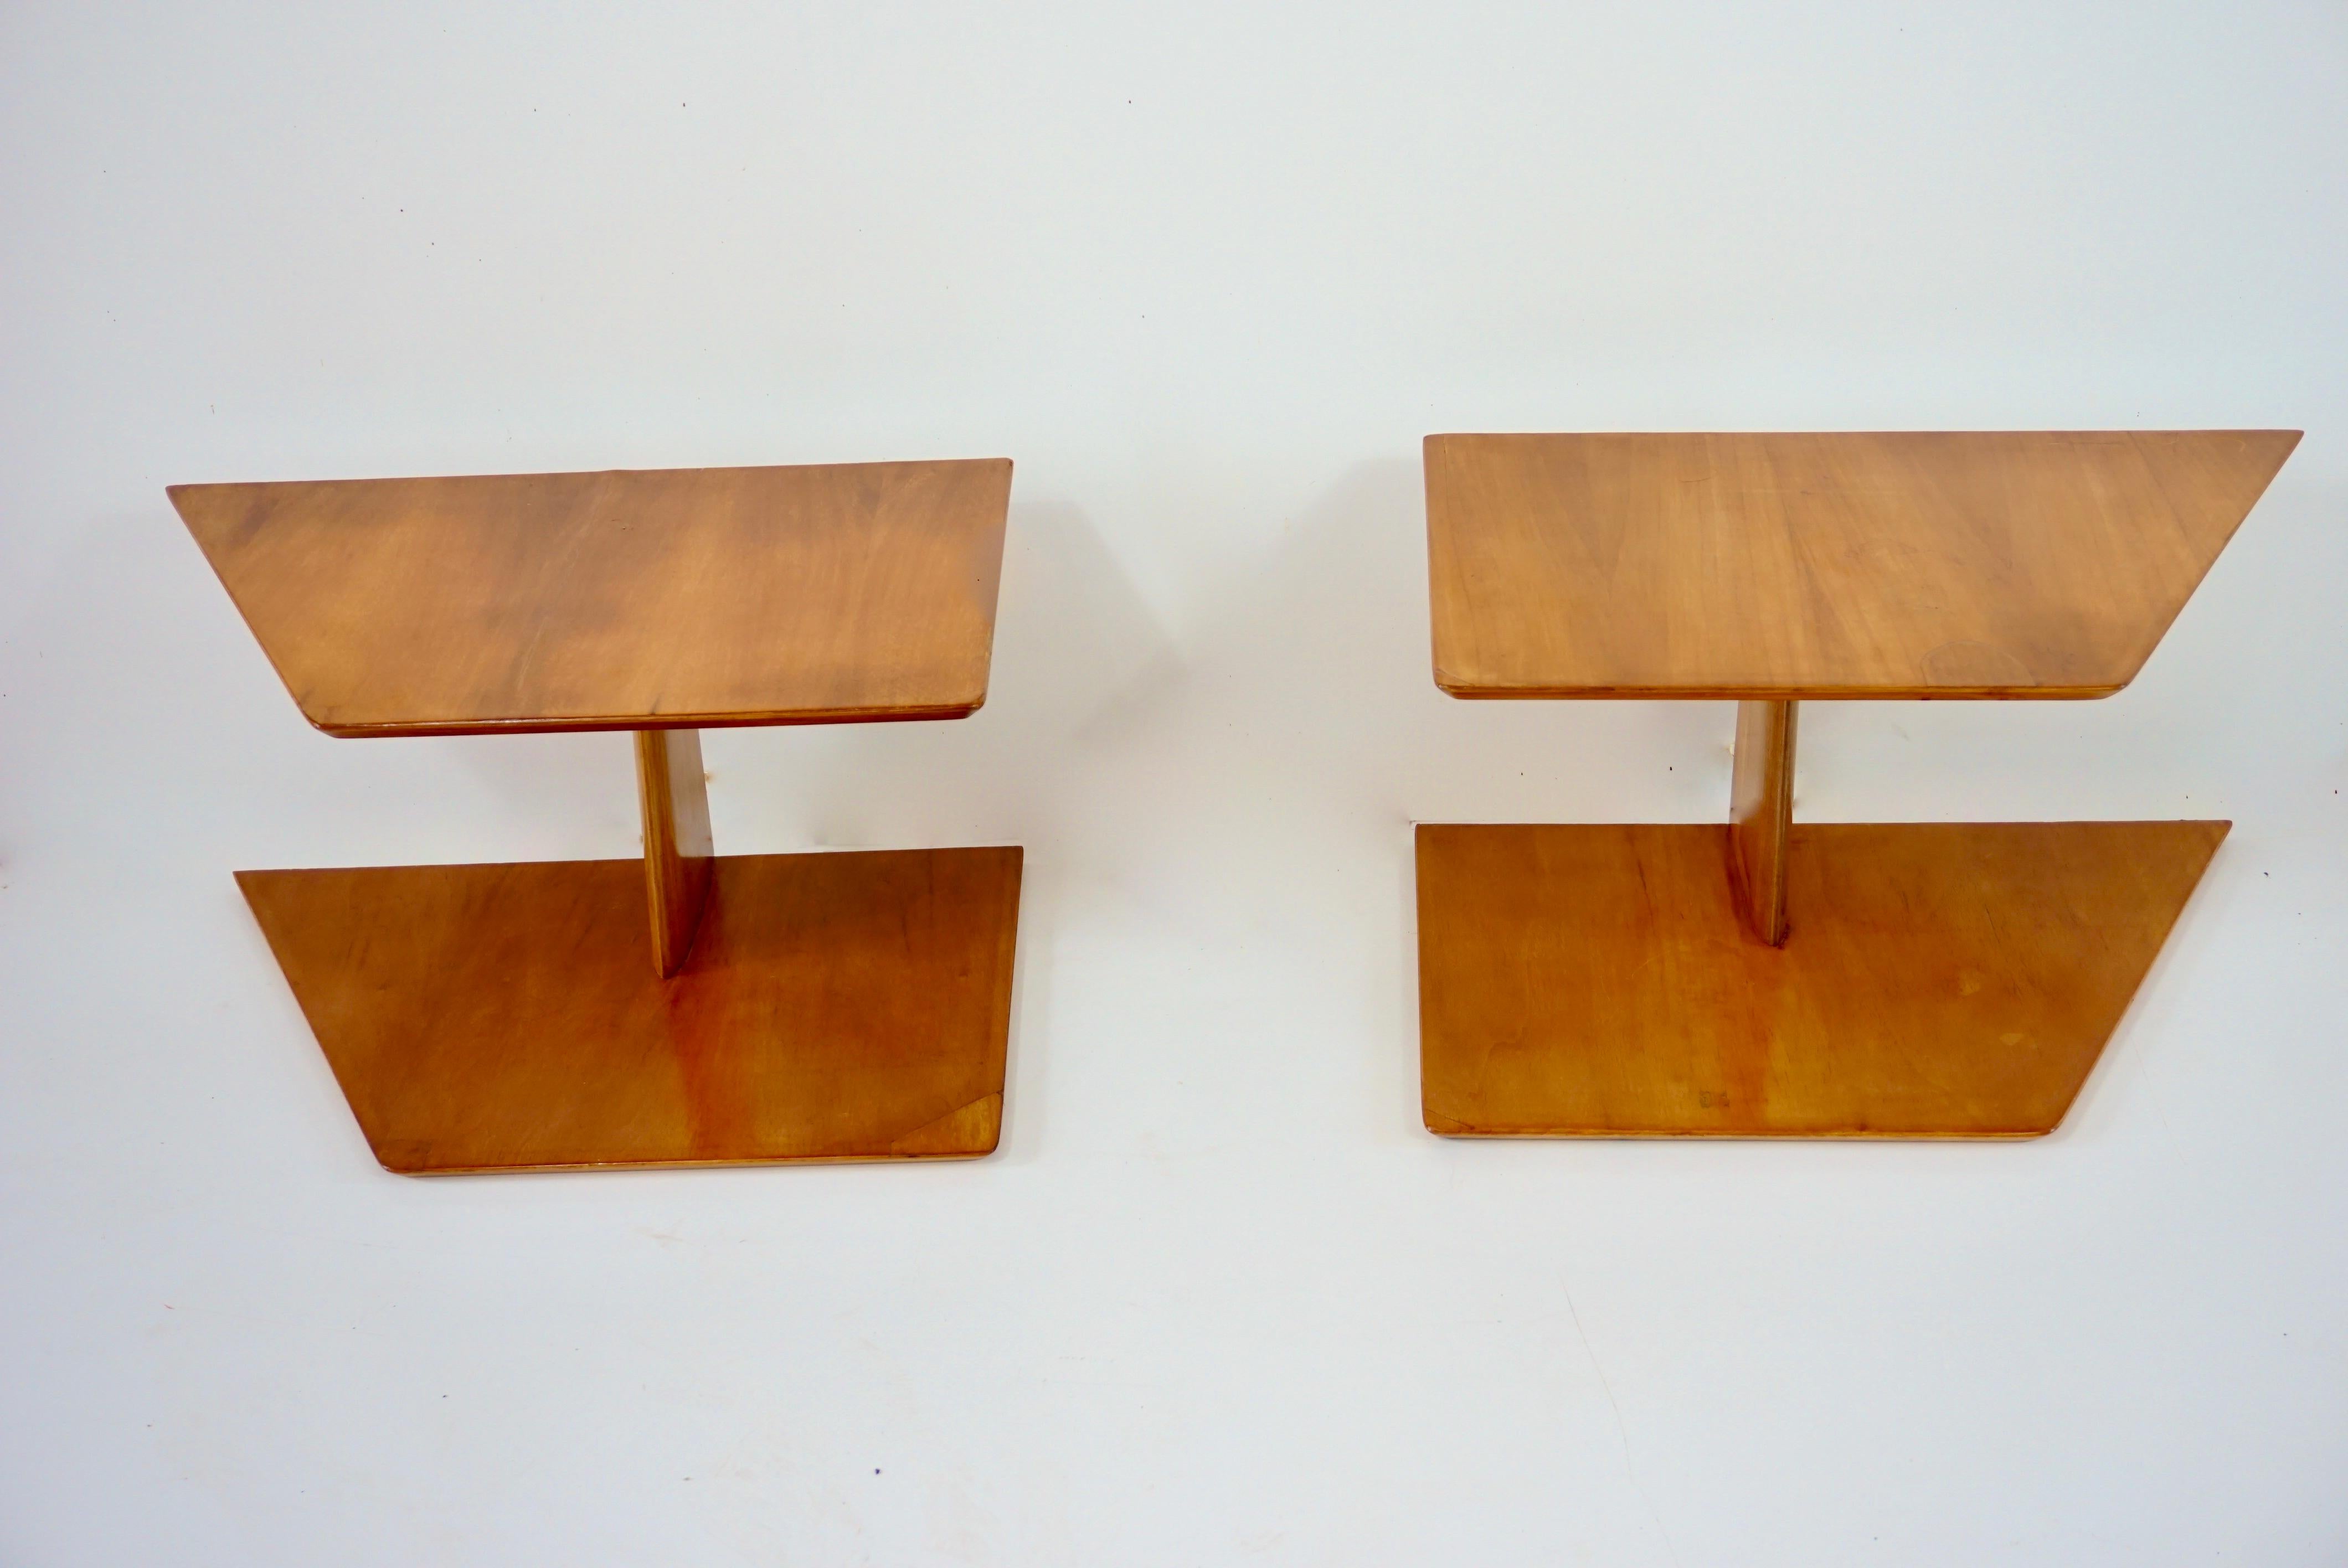 pair of hanging elm wood nightstands or bed side tables by Gio Ponti 
wall mounted two shelves side tables
finishing of the owl's beak top
part of a pair of  original headboards where headboards were destroyed
by Gio Ponti from the furniture of the